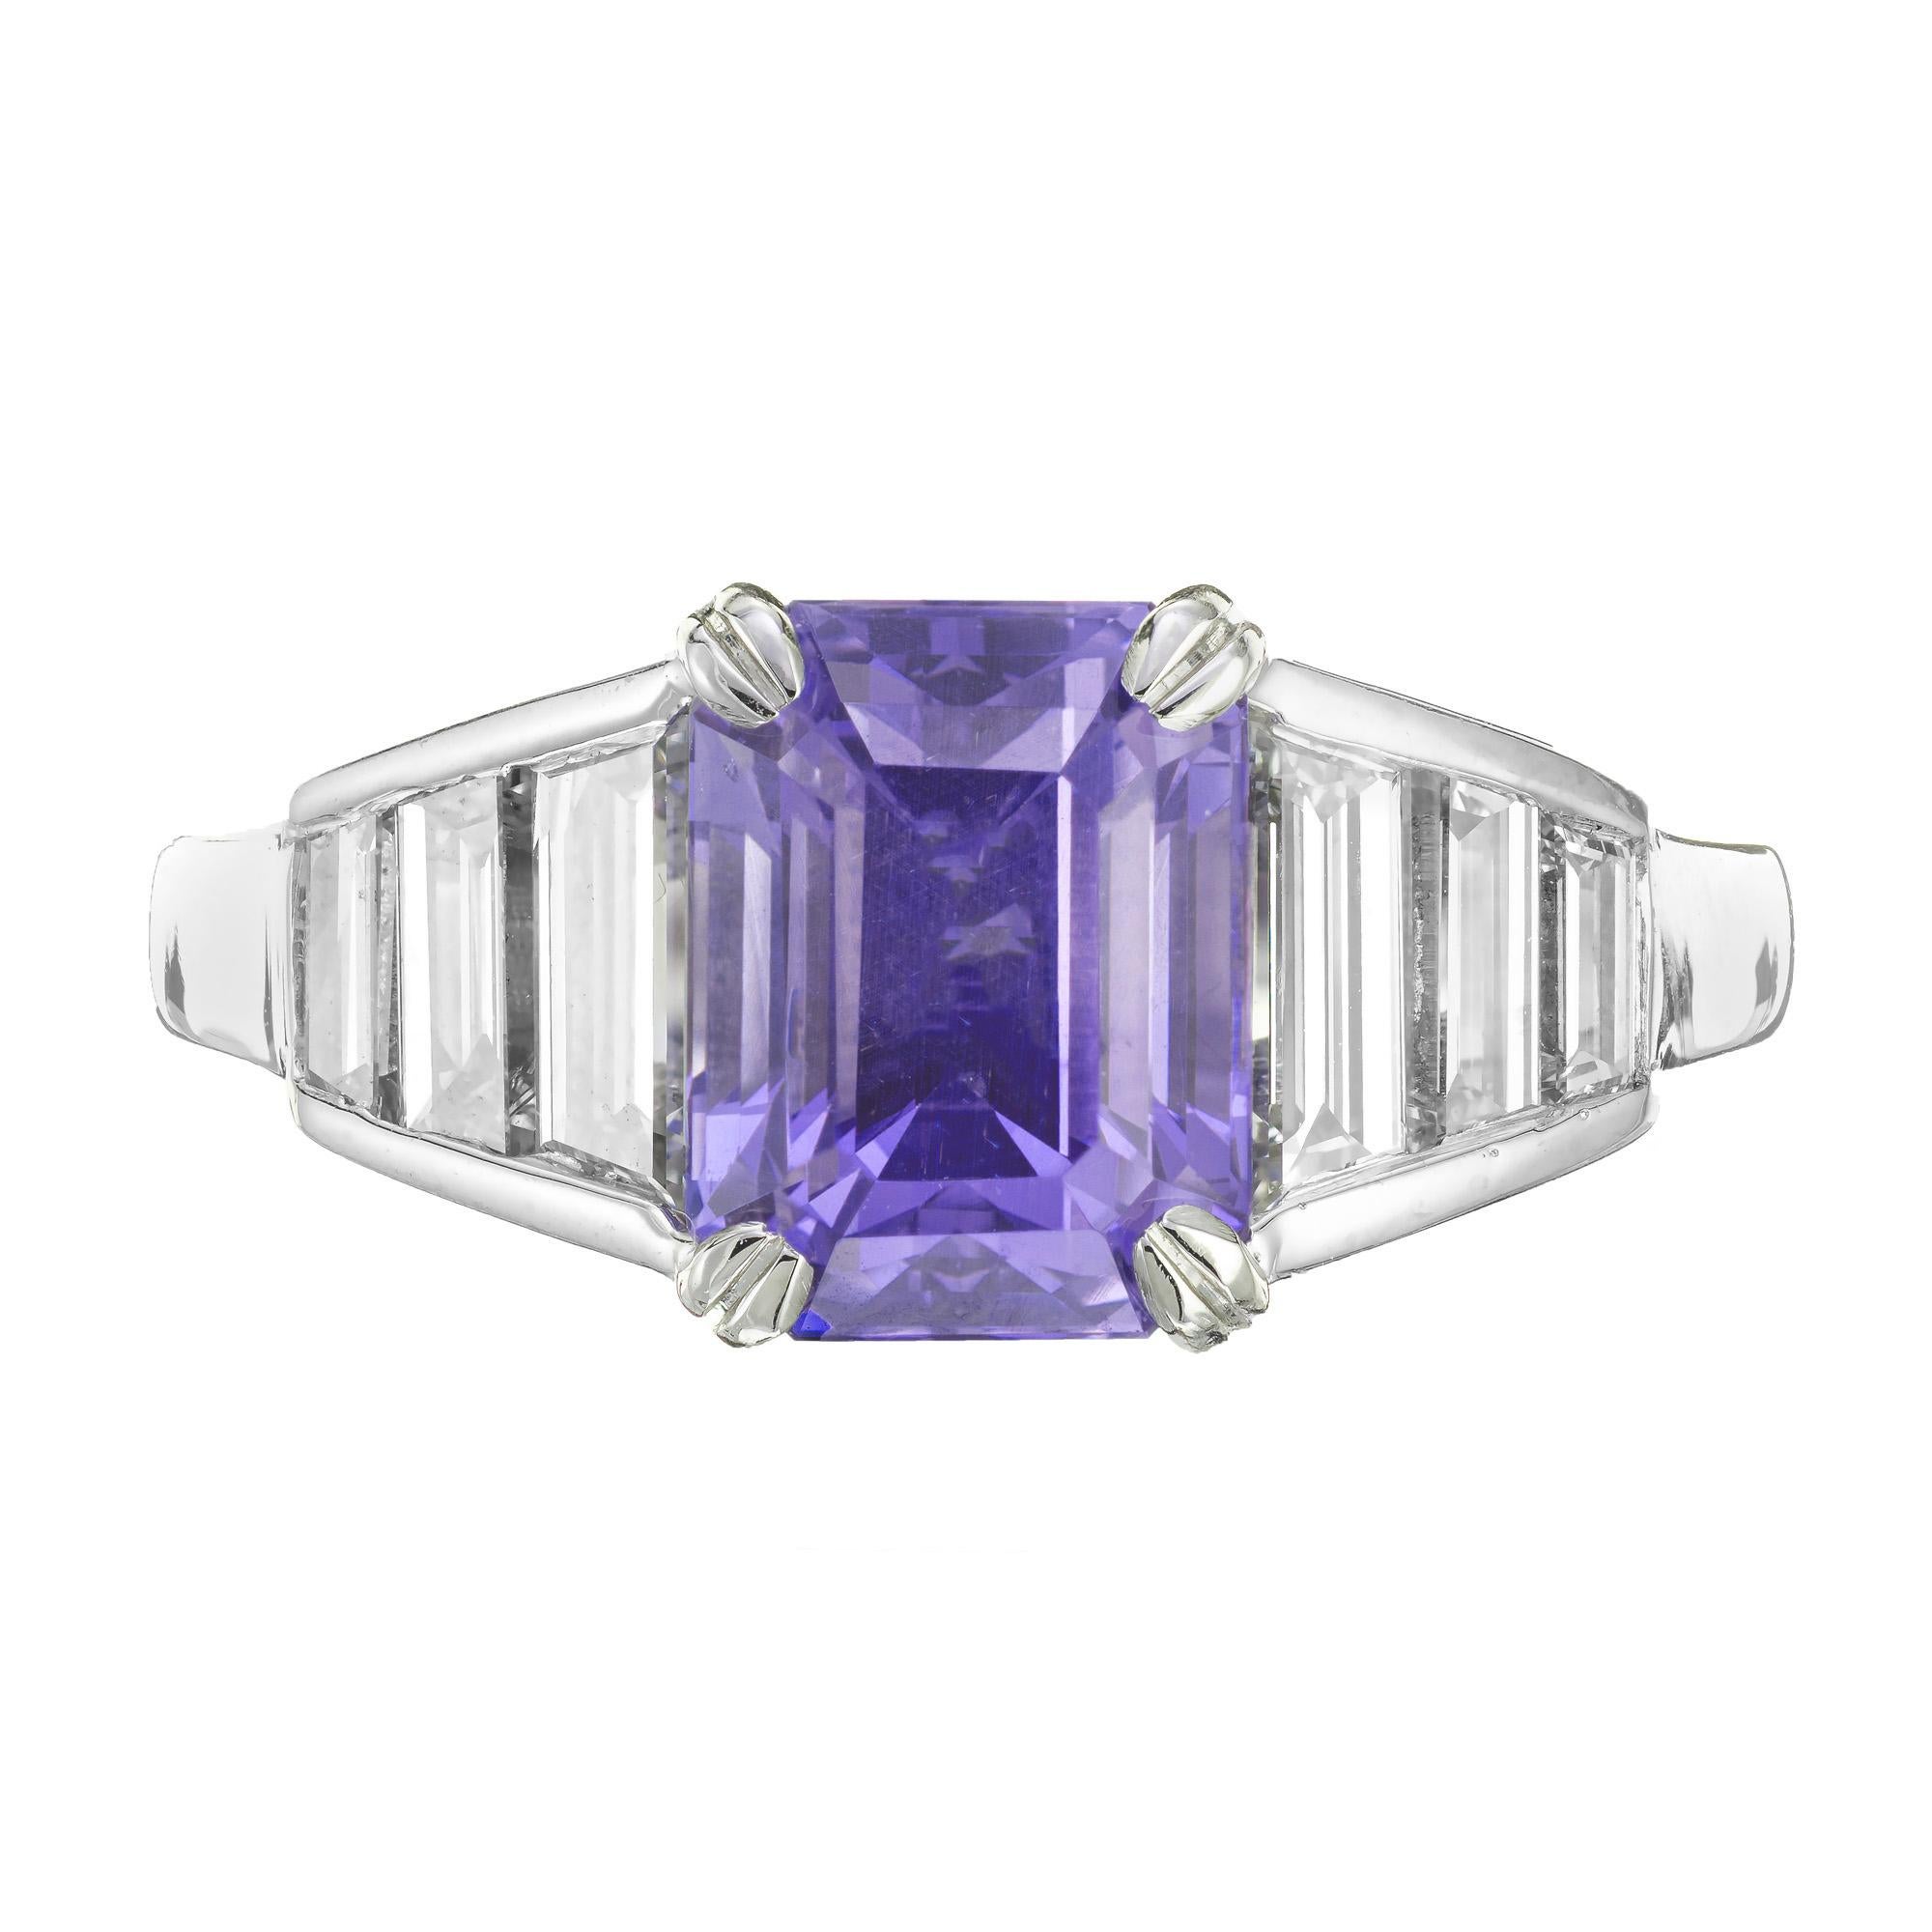 Emerald step cut sapphire and diamond engagement ring. GIA certified natural violet blue Sapphire center stone set in a platinum setting with 6 emerald cut baguette accent diamonds. 

1 Emerald step cut violet blue Sapphire, approx. total weight